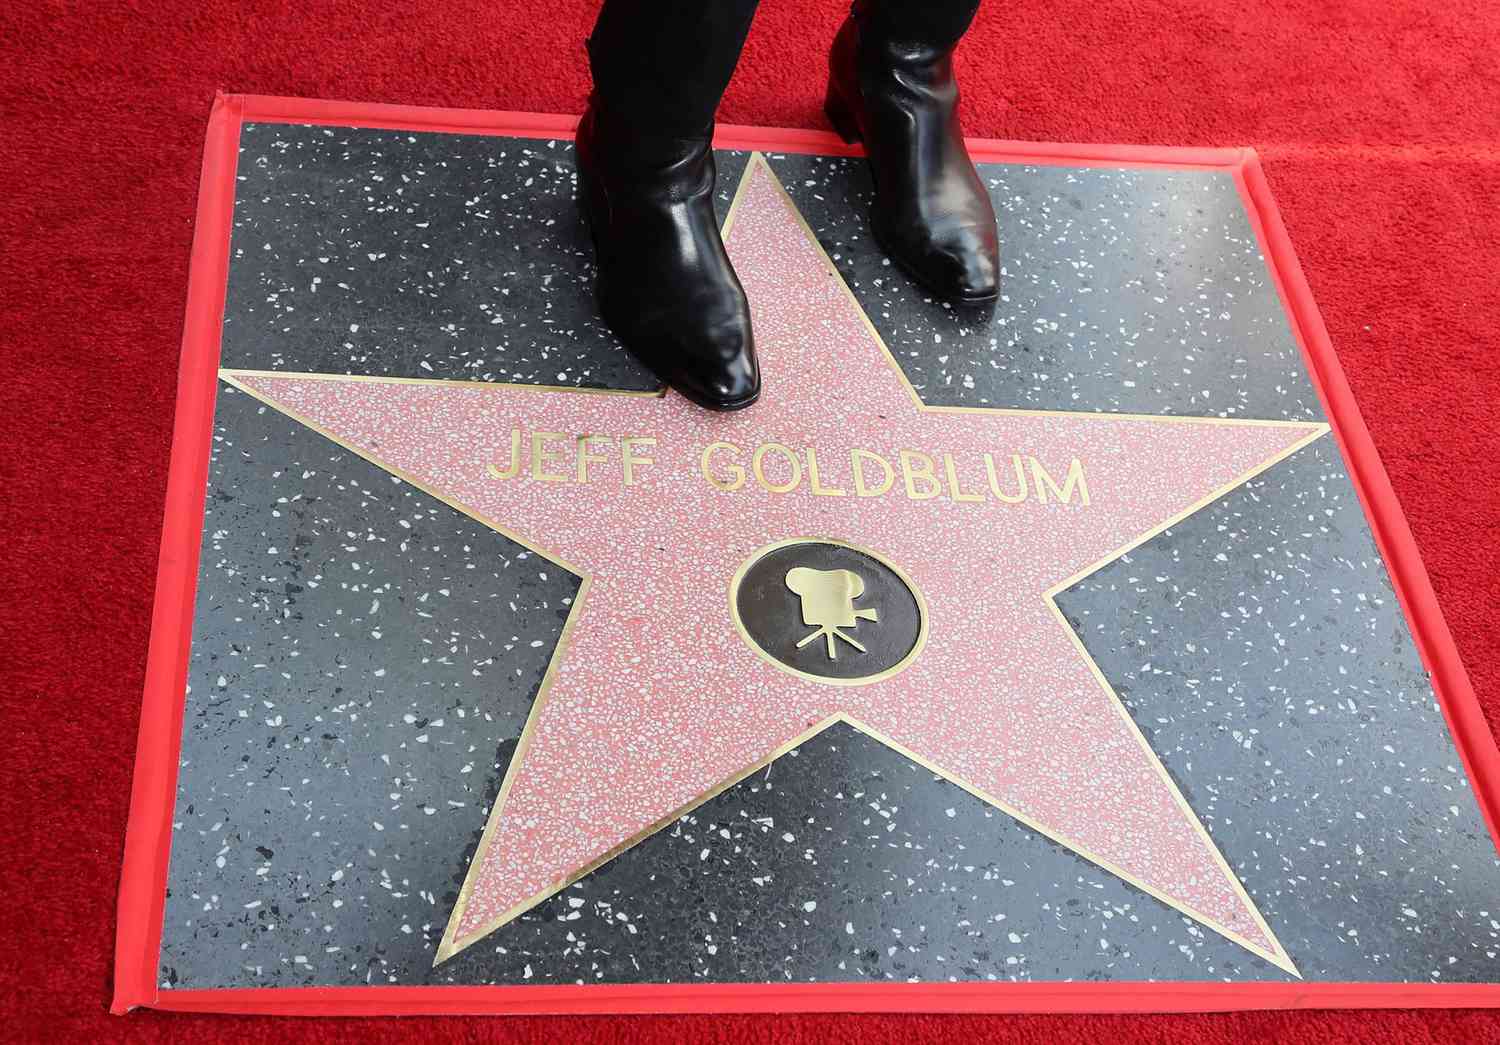 Jeff Goldblum Honored With Star On The Hollywood Walk Of Fame